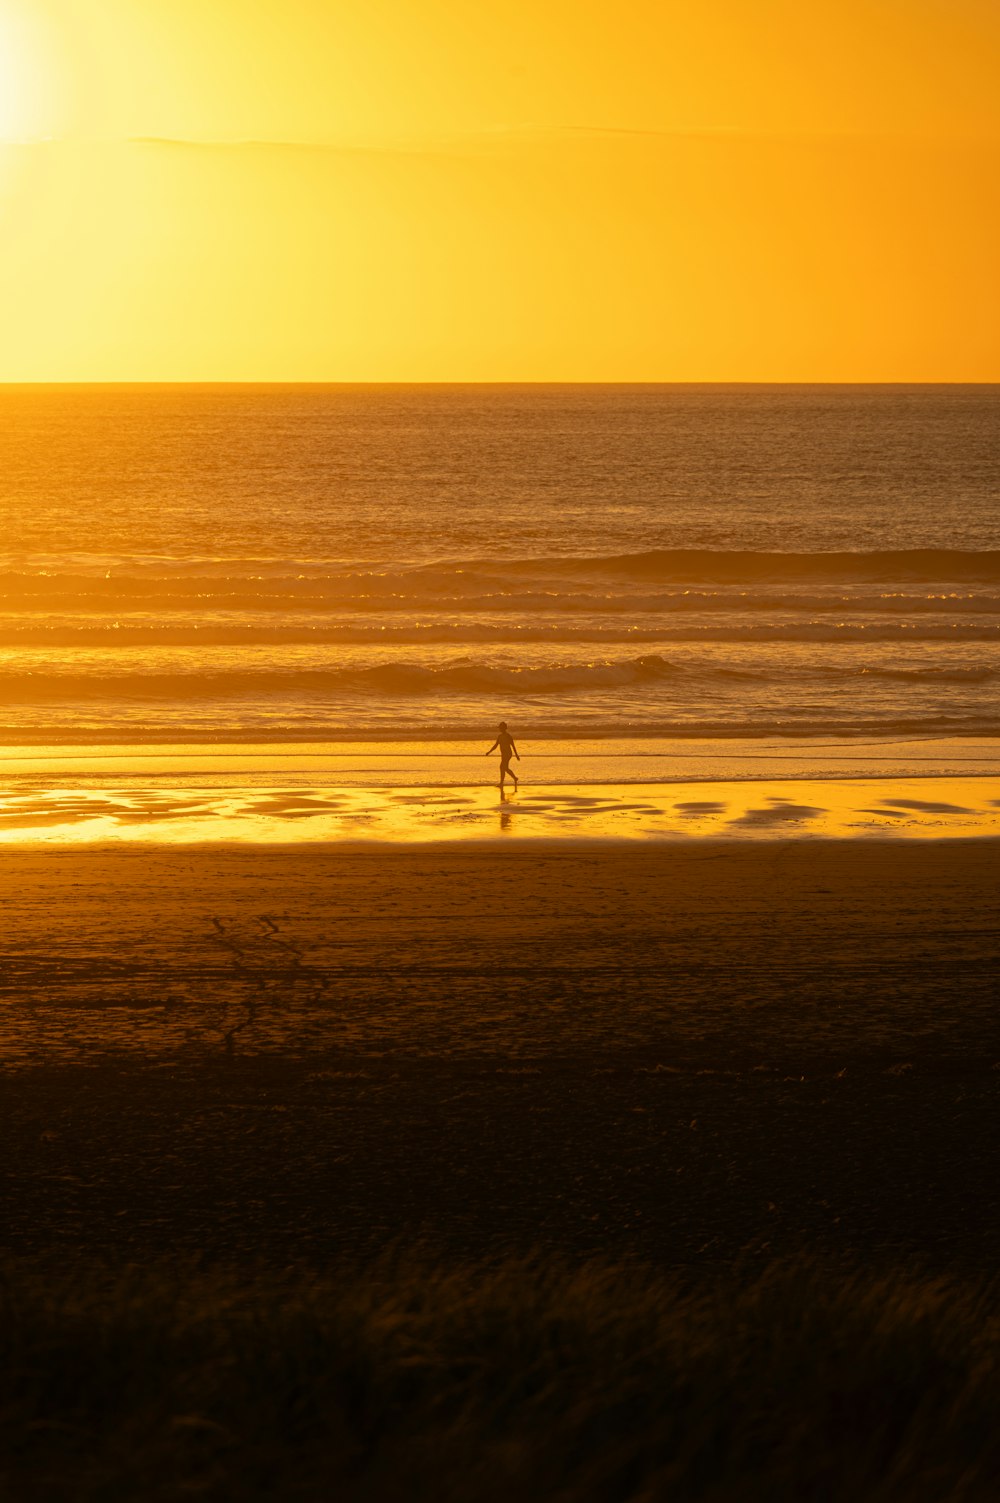 a person walking on the beach at sunset